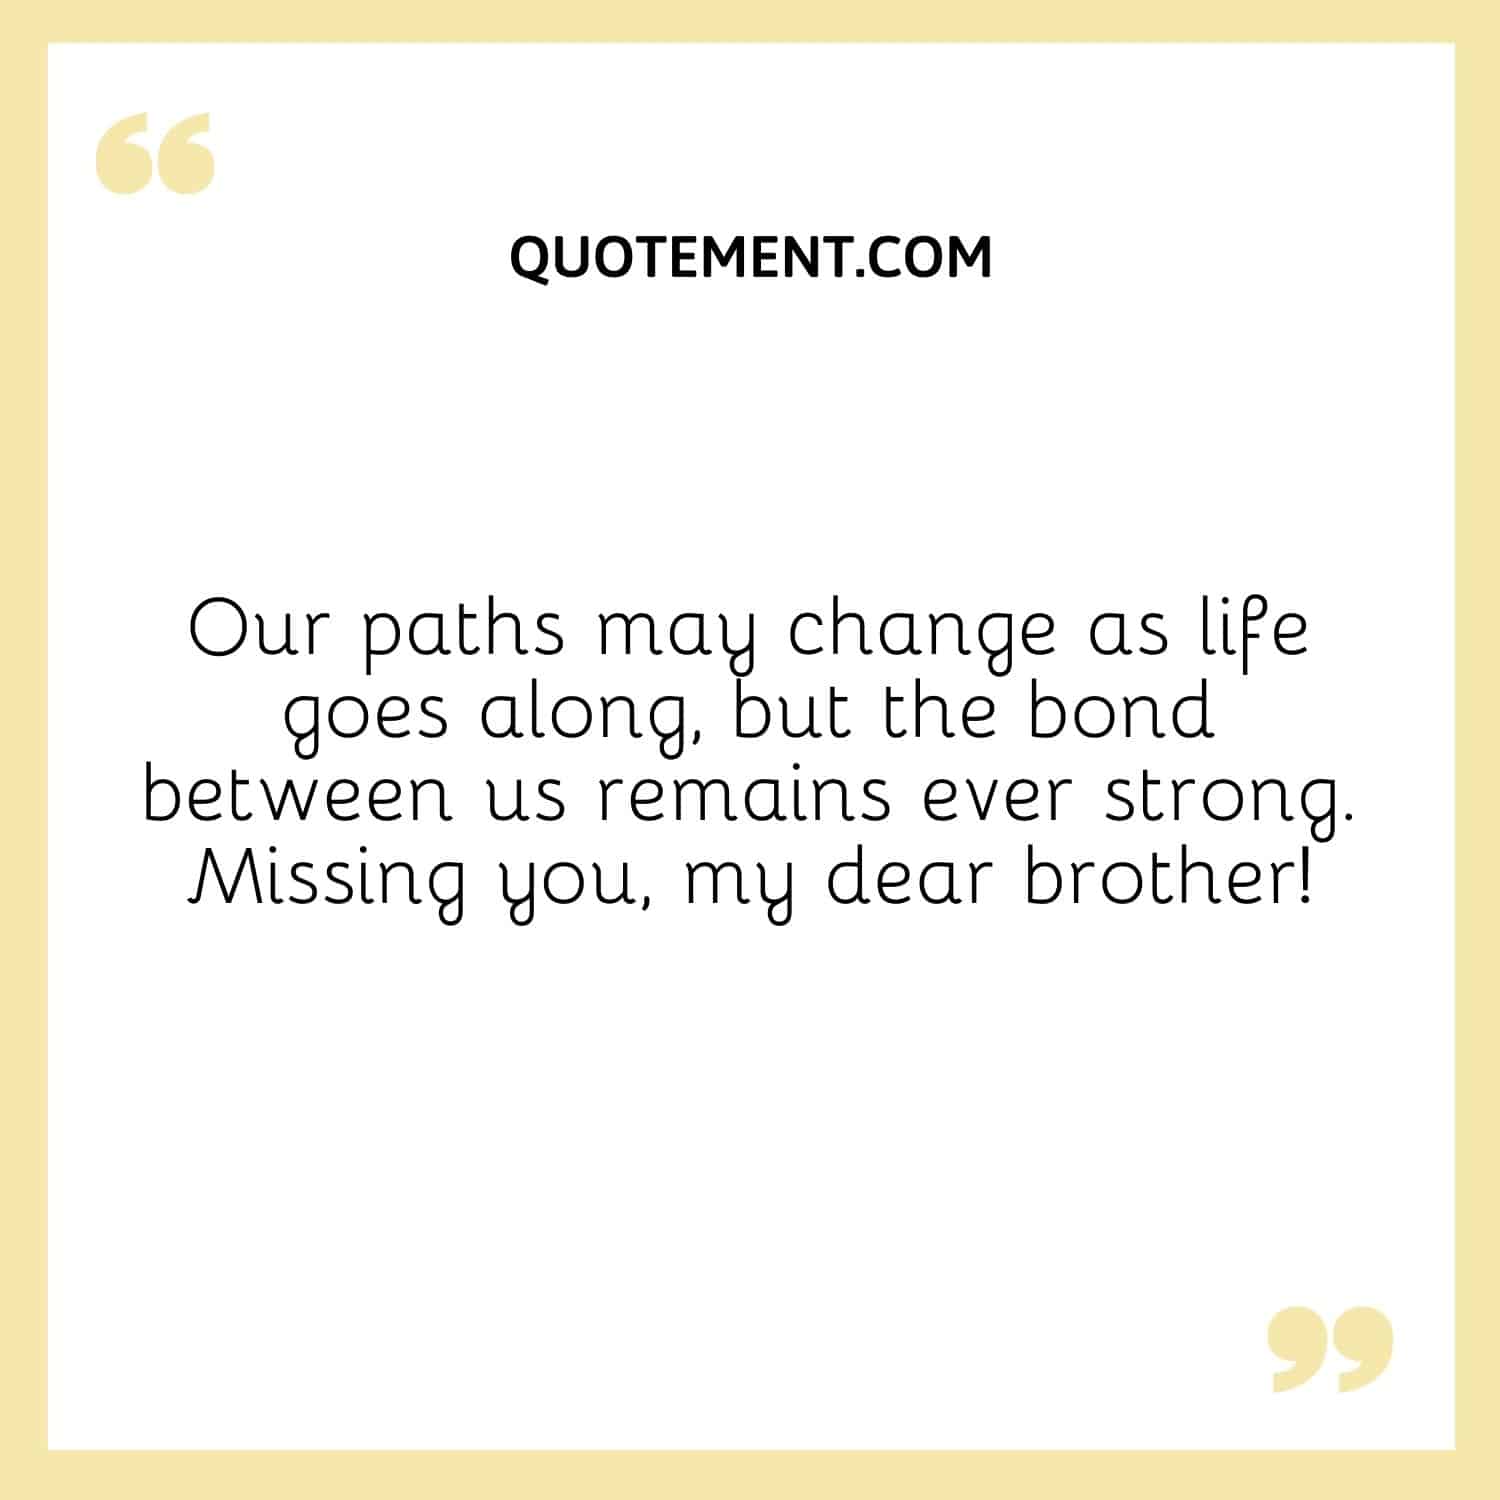 Our paths may change as life goes along, but the bond between us remains ever strong. Missing you, my dear brother!